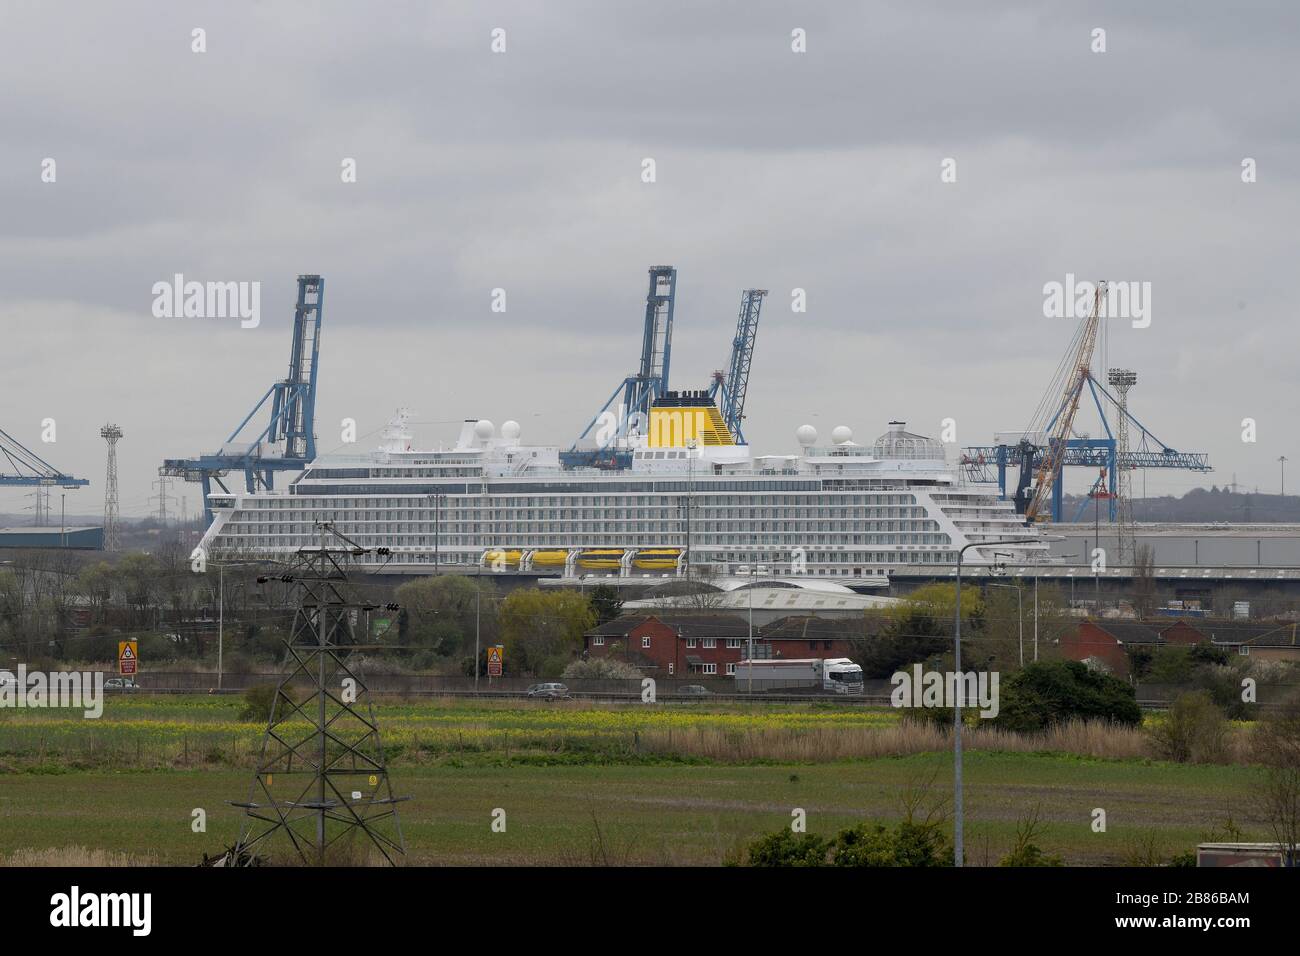 Tilbury Essex, UK. 20th Mar, 2020. The Cruise ship Spirit of Discovery in Tilbury docks due to the Coronavirus outbreak has been put on standby for the possible use as a hospital ship during the Covid19 crisis. The 58,250 tonne ship was delivered to Saga Cruises in July 2019 and has a capacity for 999 passengers and 523 crew. Credit: MARTIN DALTON/Alamy Live News Stock Photo